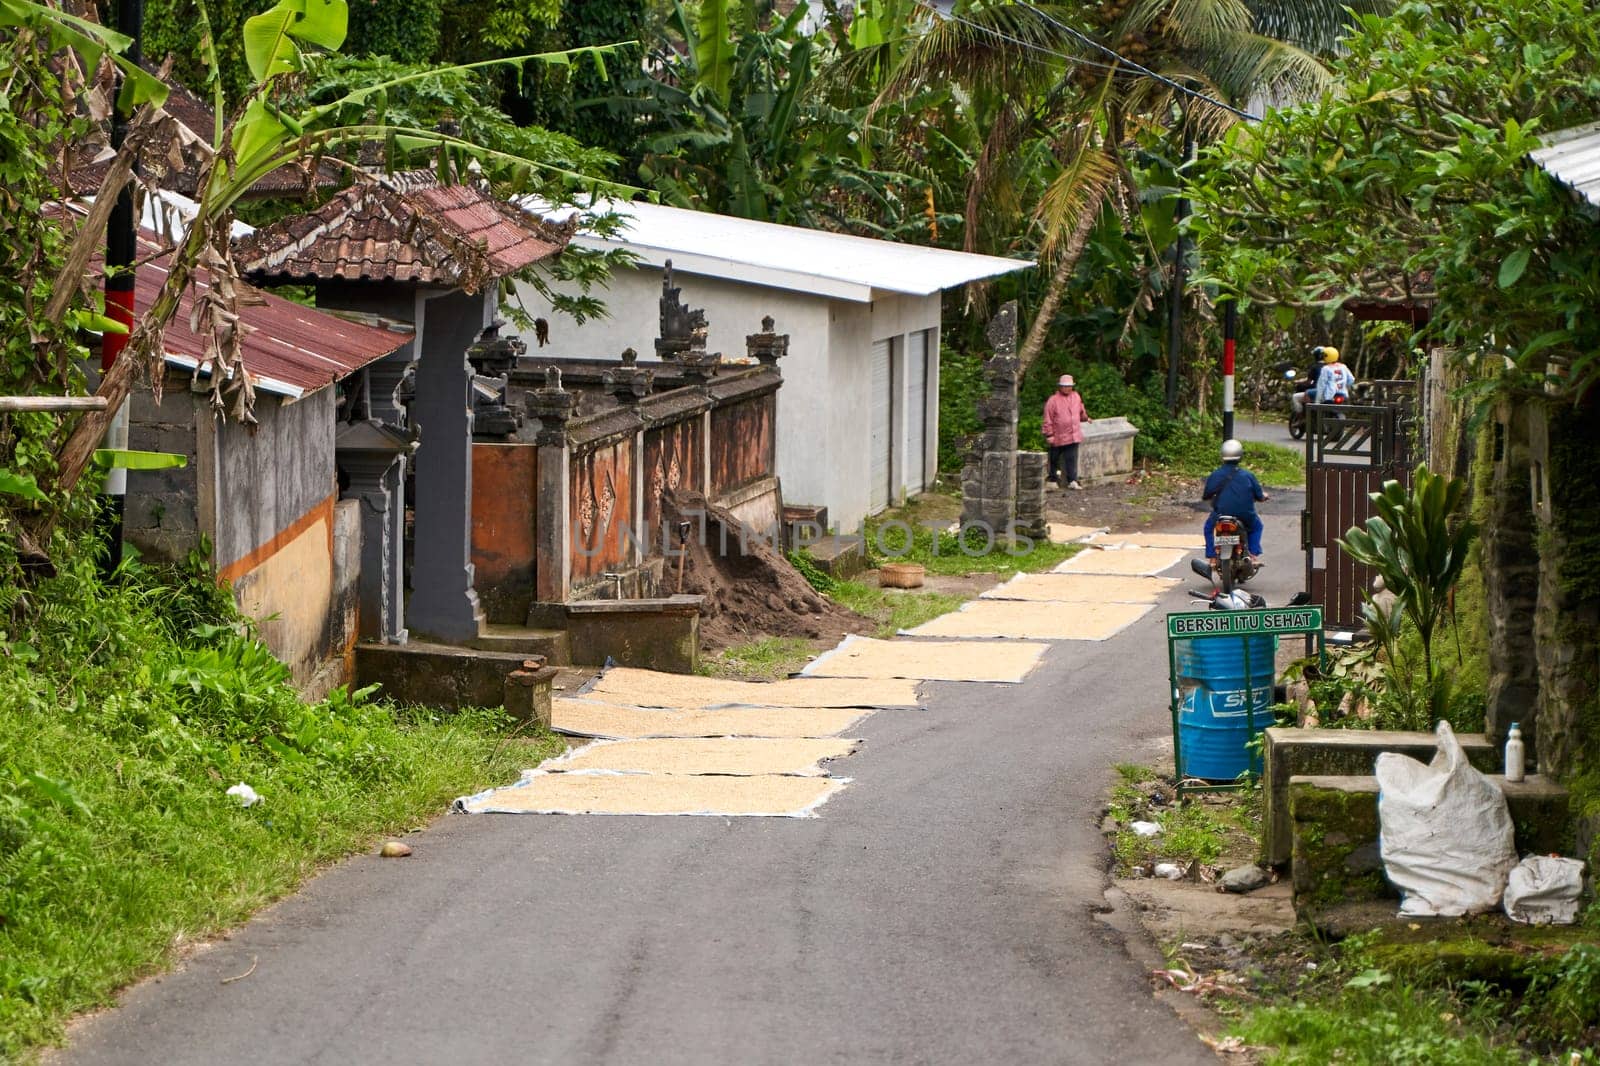 Local people dry grain on the road near their homes in Asia. Bali, Indonesia - 12.08.2022